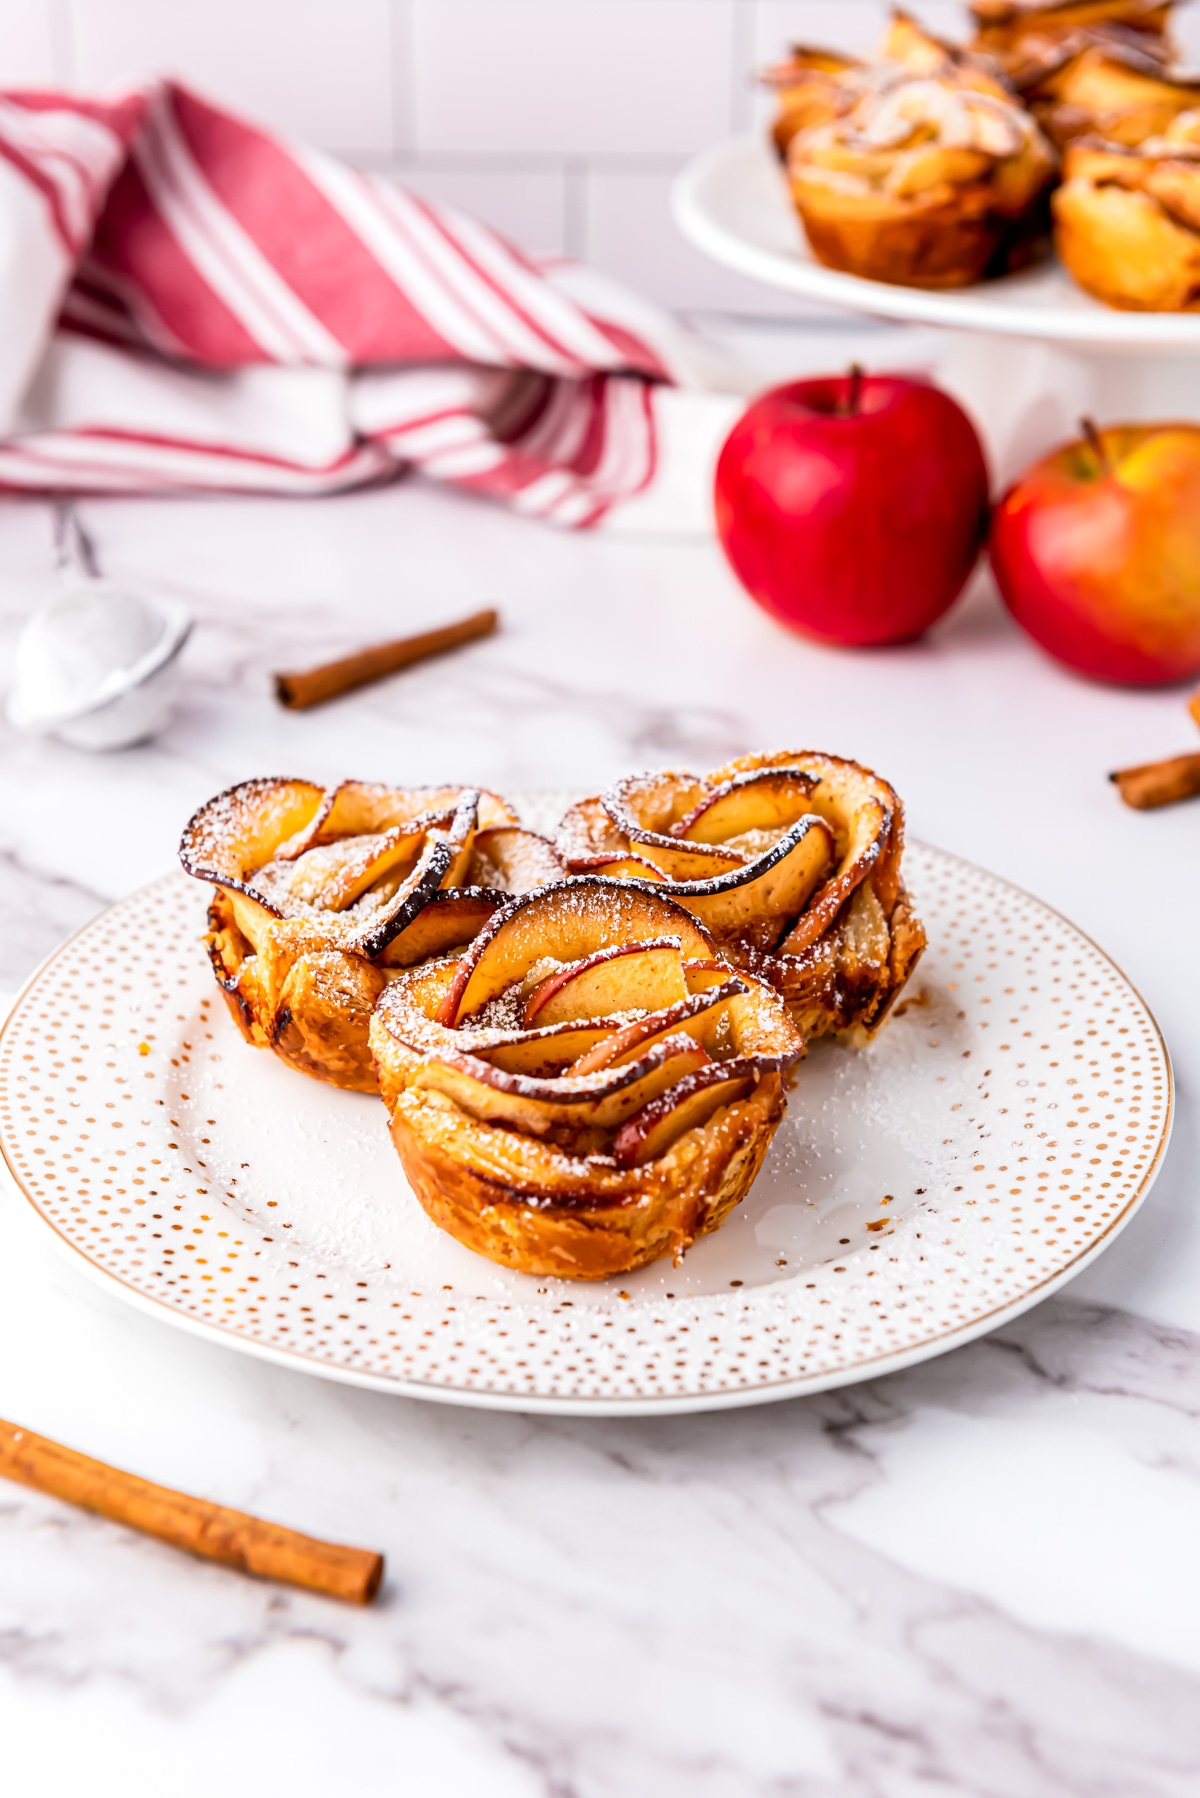 Three Apple Roses with Puff Pastry sprinkled with powdered sugar and sitting on a plate.